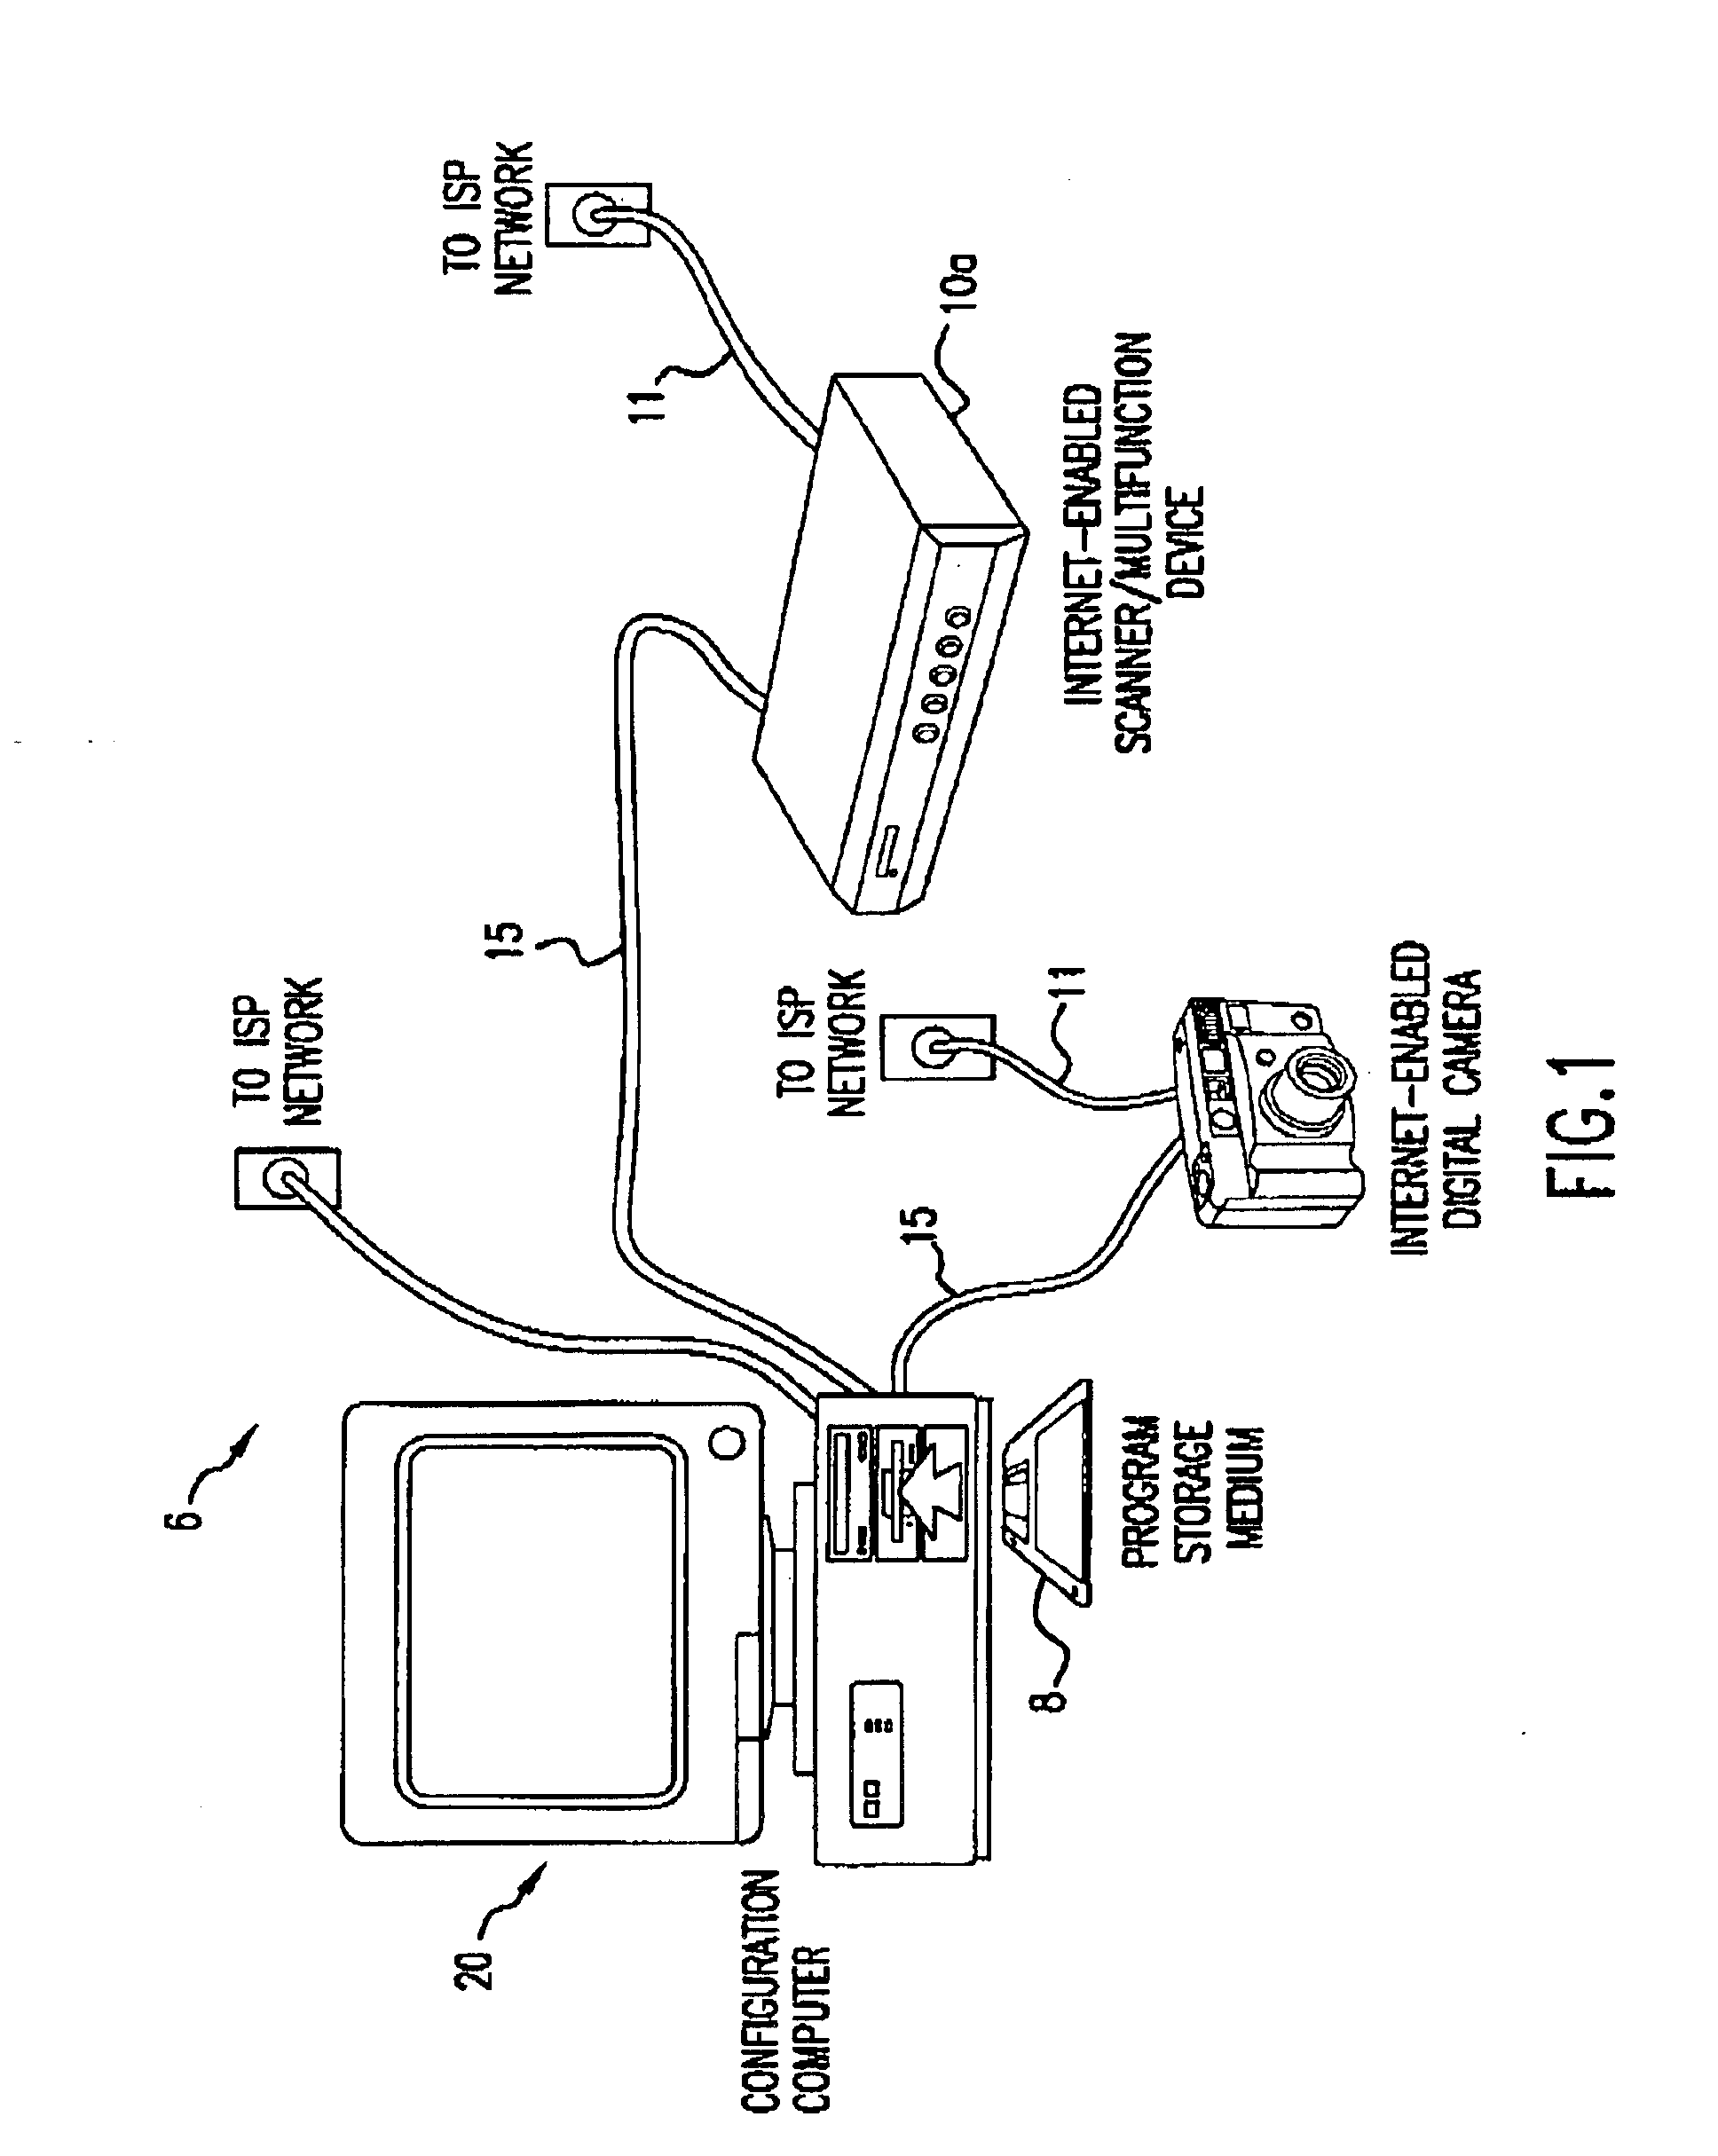 Simplified configuration of an internet-enabled device